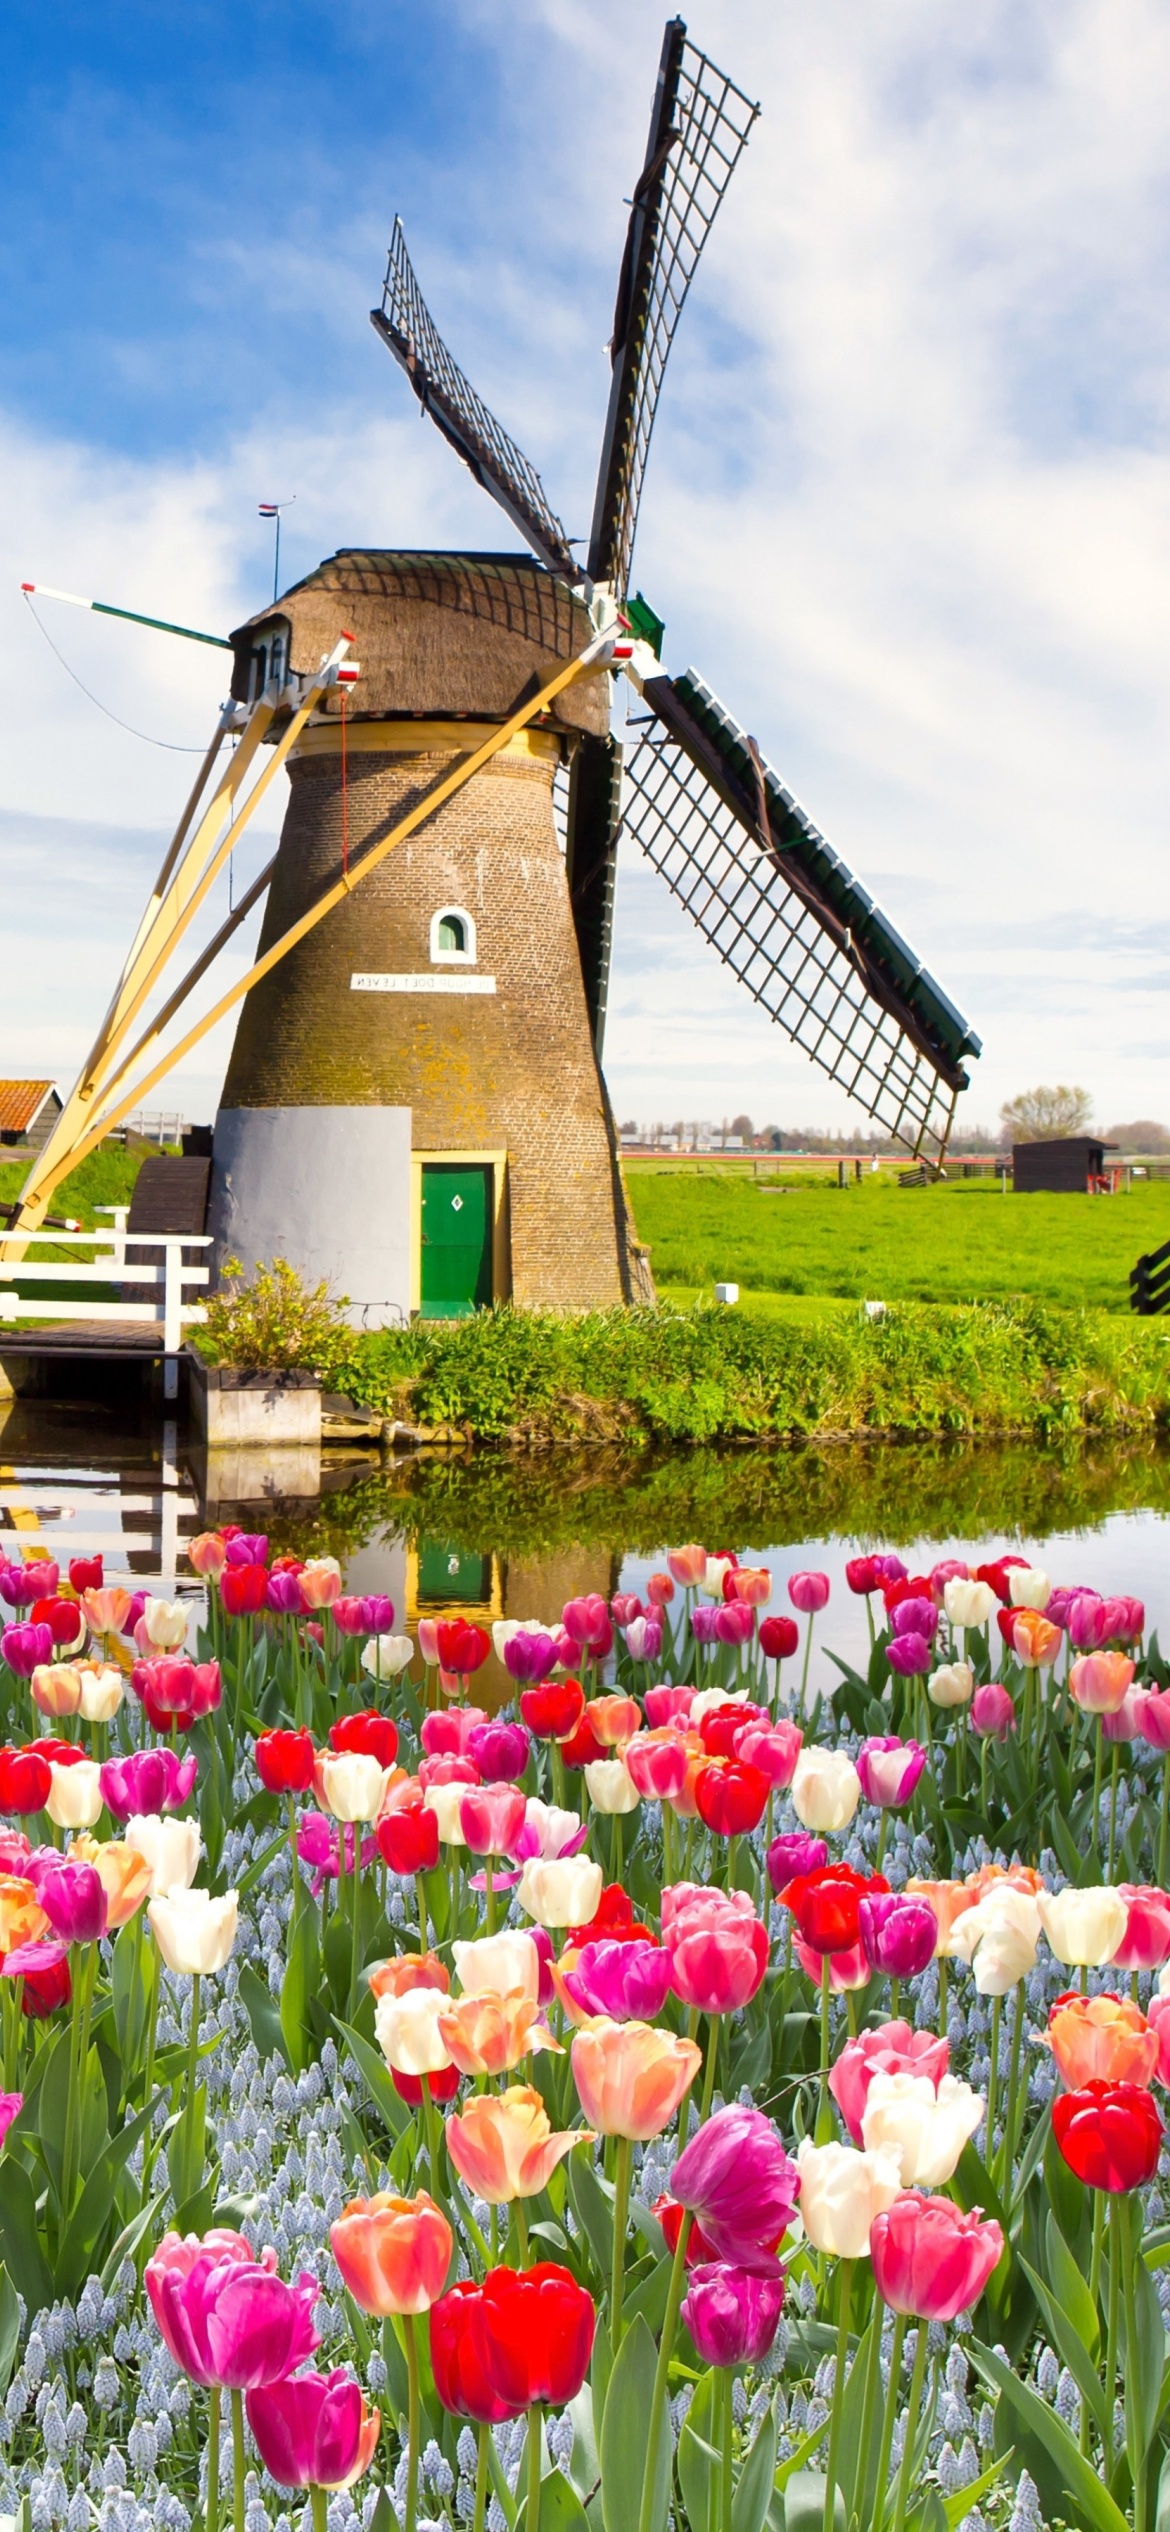 Mill and tulips in Holland screenshot #1 1170x2532